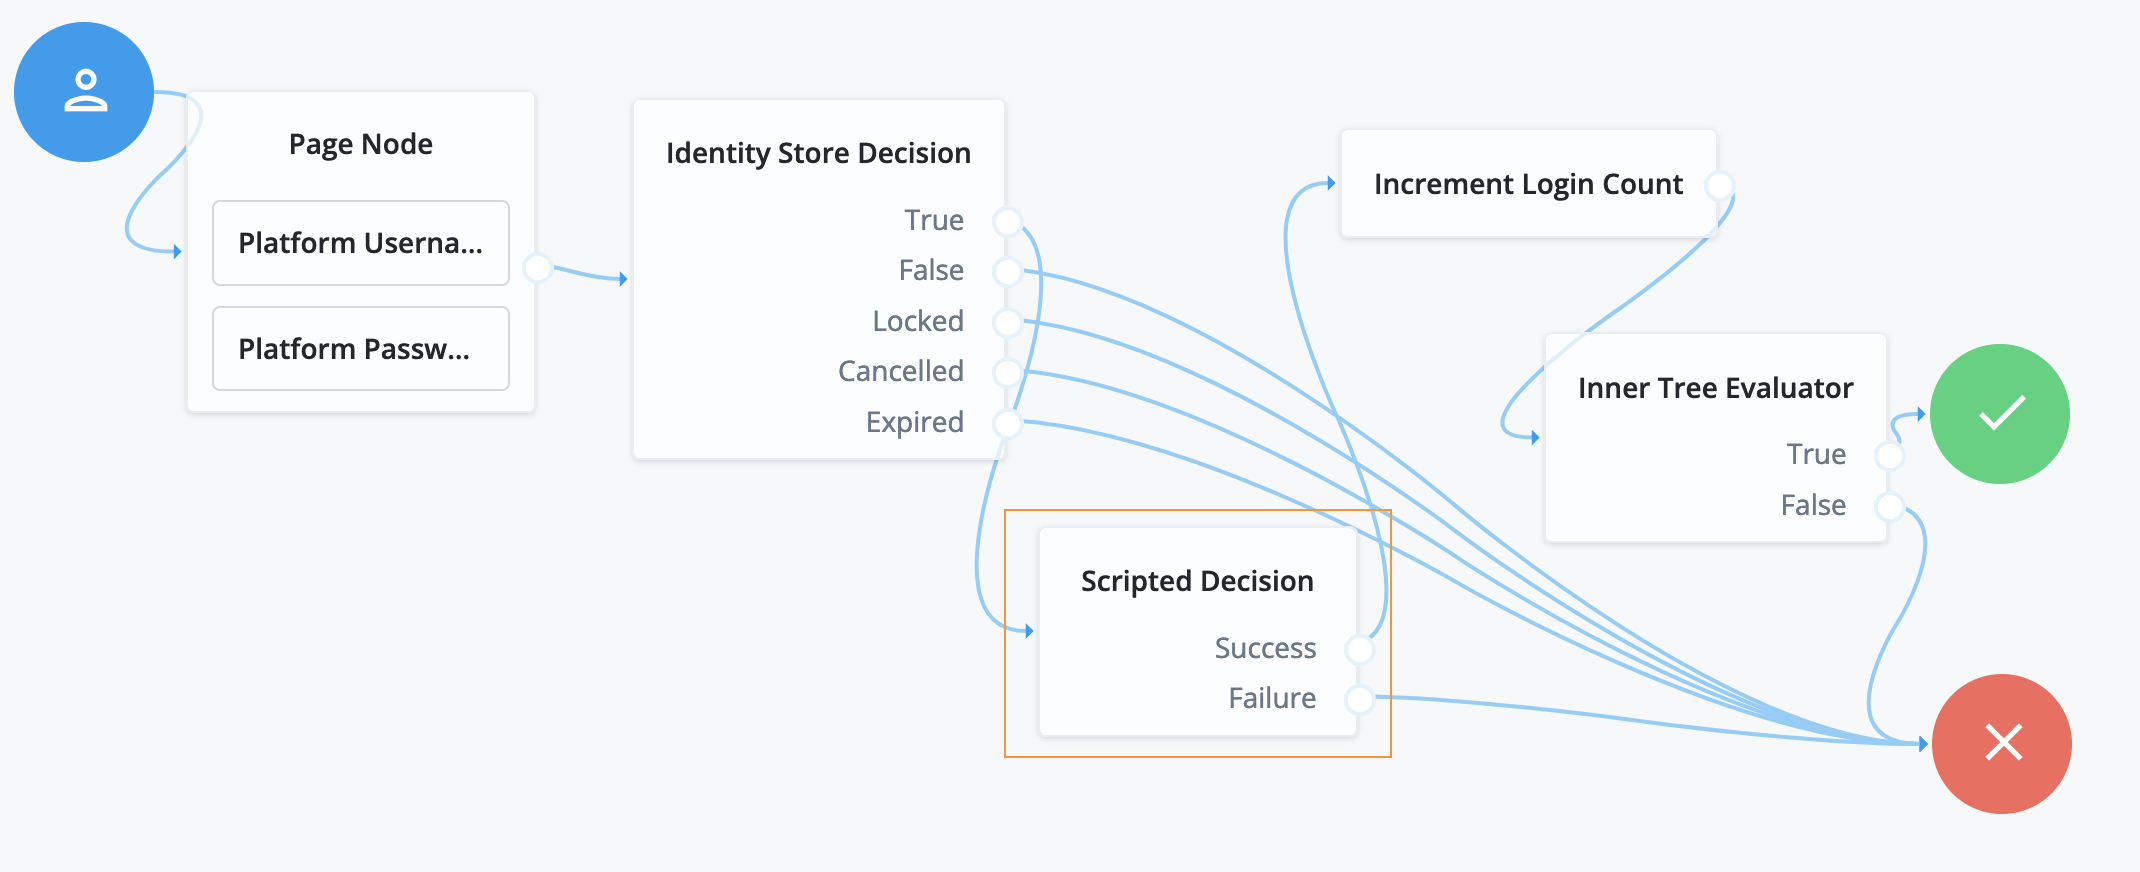 Journey with a [.label]#Scripted Decision# node